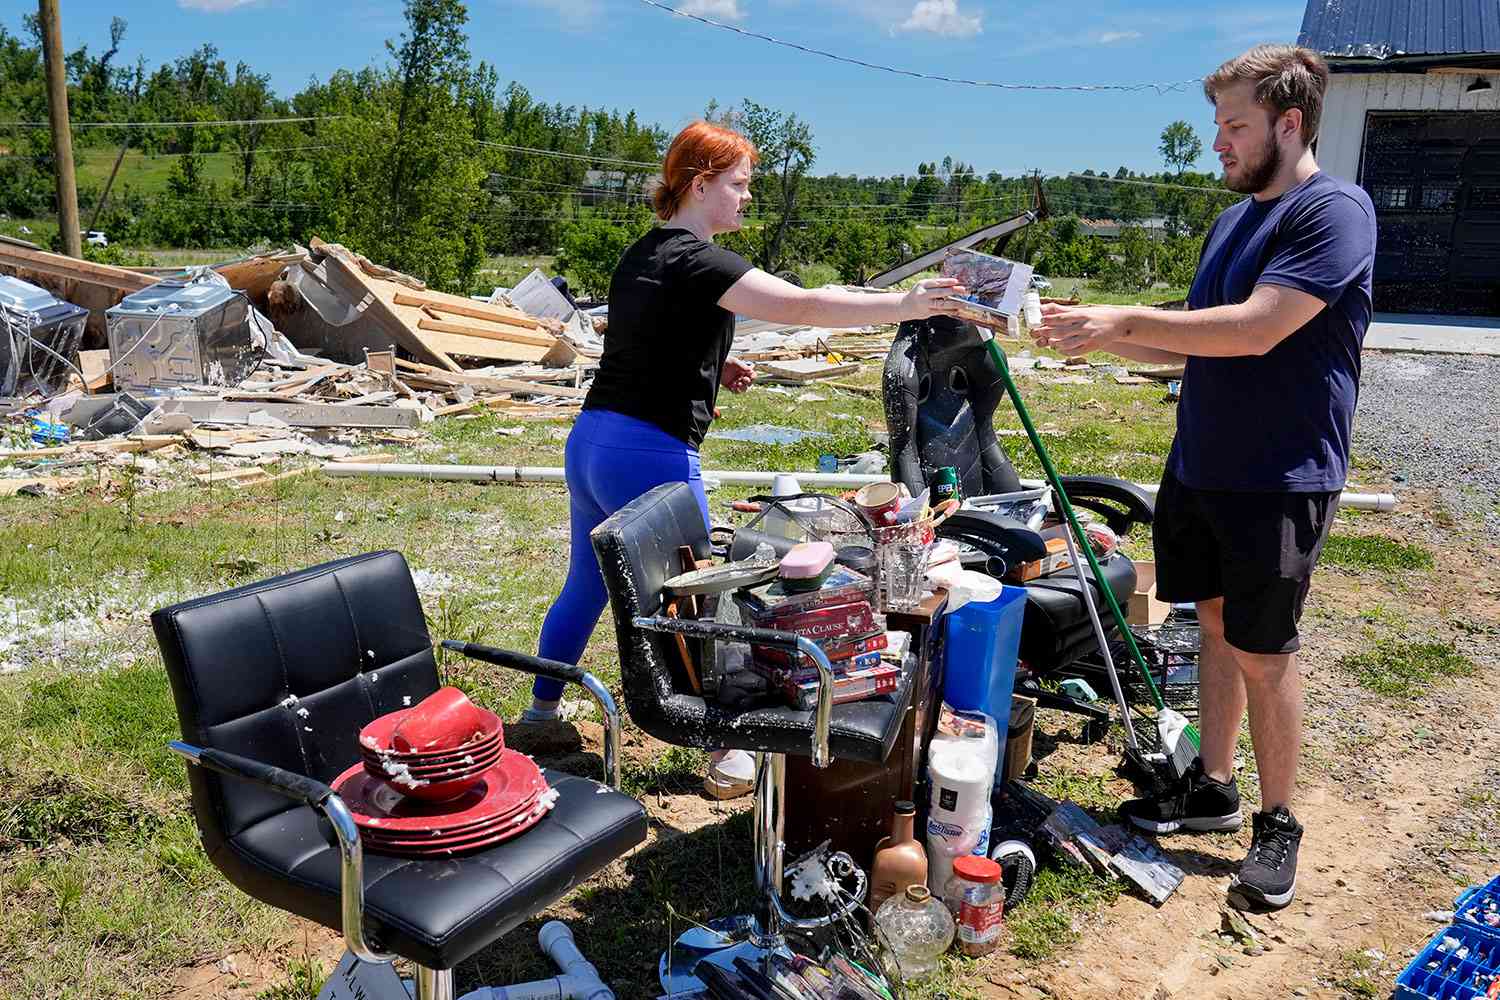 Haley Loukota, left, and her fiance Devin Johnson collect their belongings from storm debris after their home was demolished along Barnsley Loop, Tuesday, May 28, 2024, in Madisonville, Ky. A series of powerful storms hit the central and southern U.S. over the Memorial Day holiday weekend